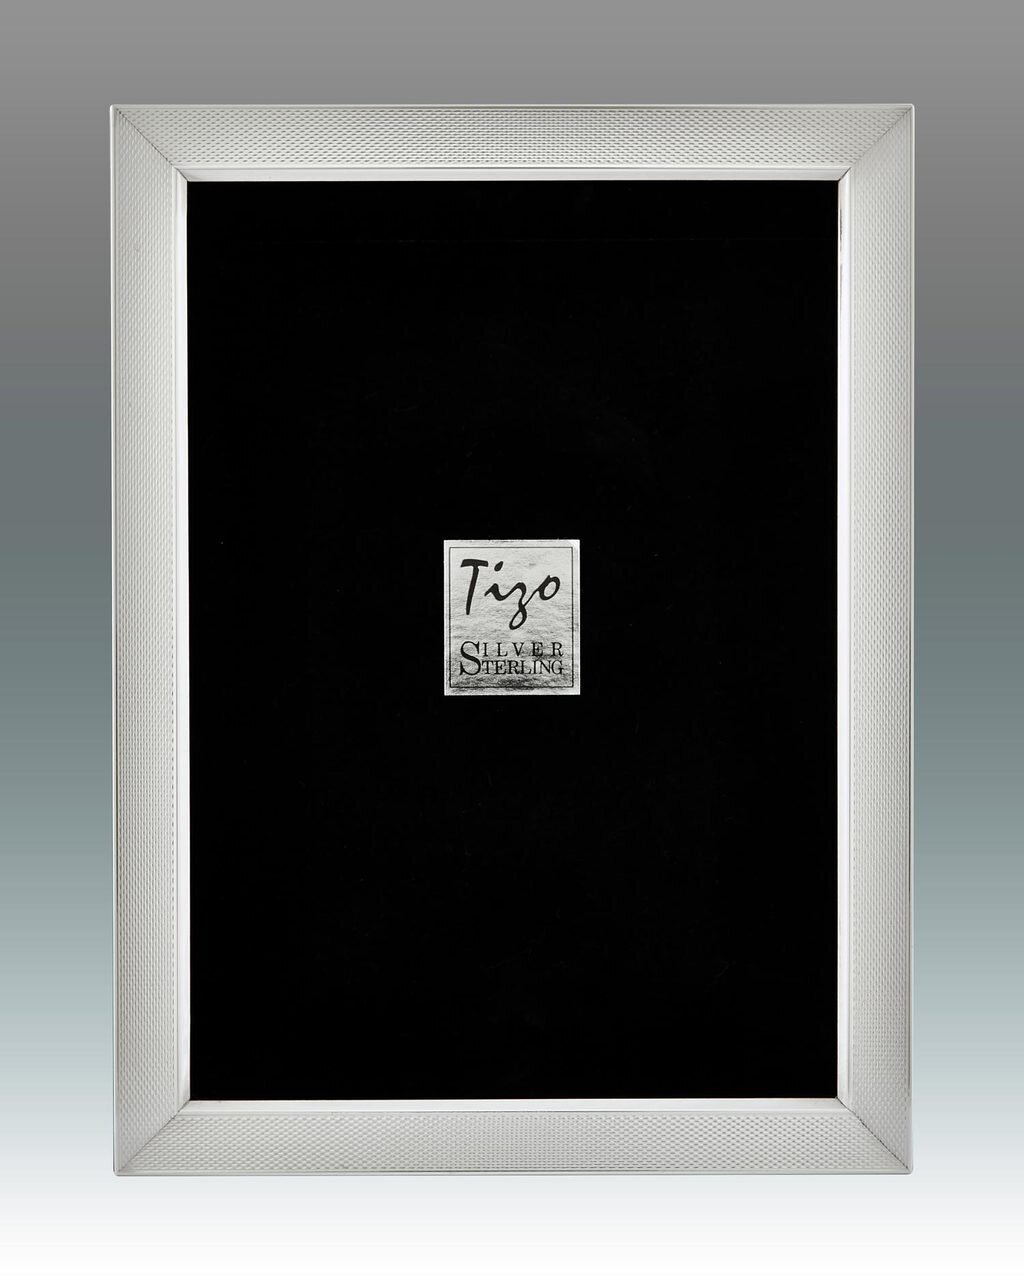 Tizo Silky Roads Sterling Silver Picture Frame 5 x 7 Inch